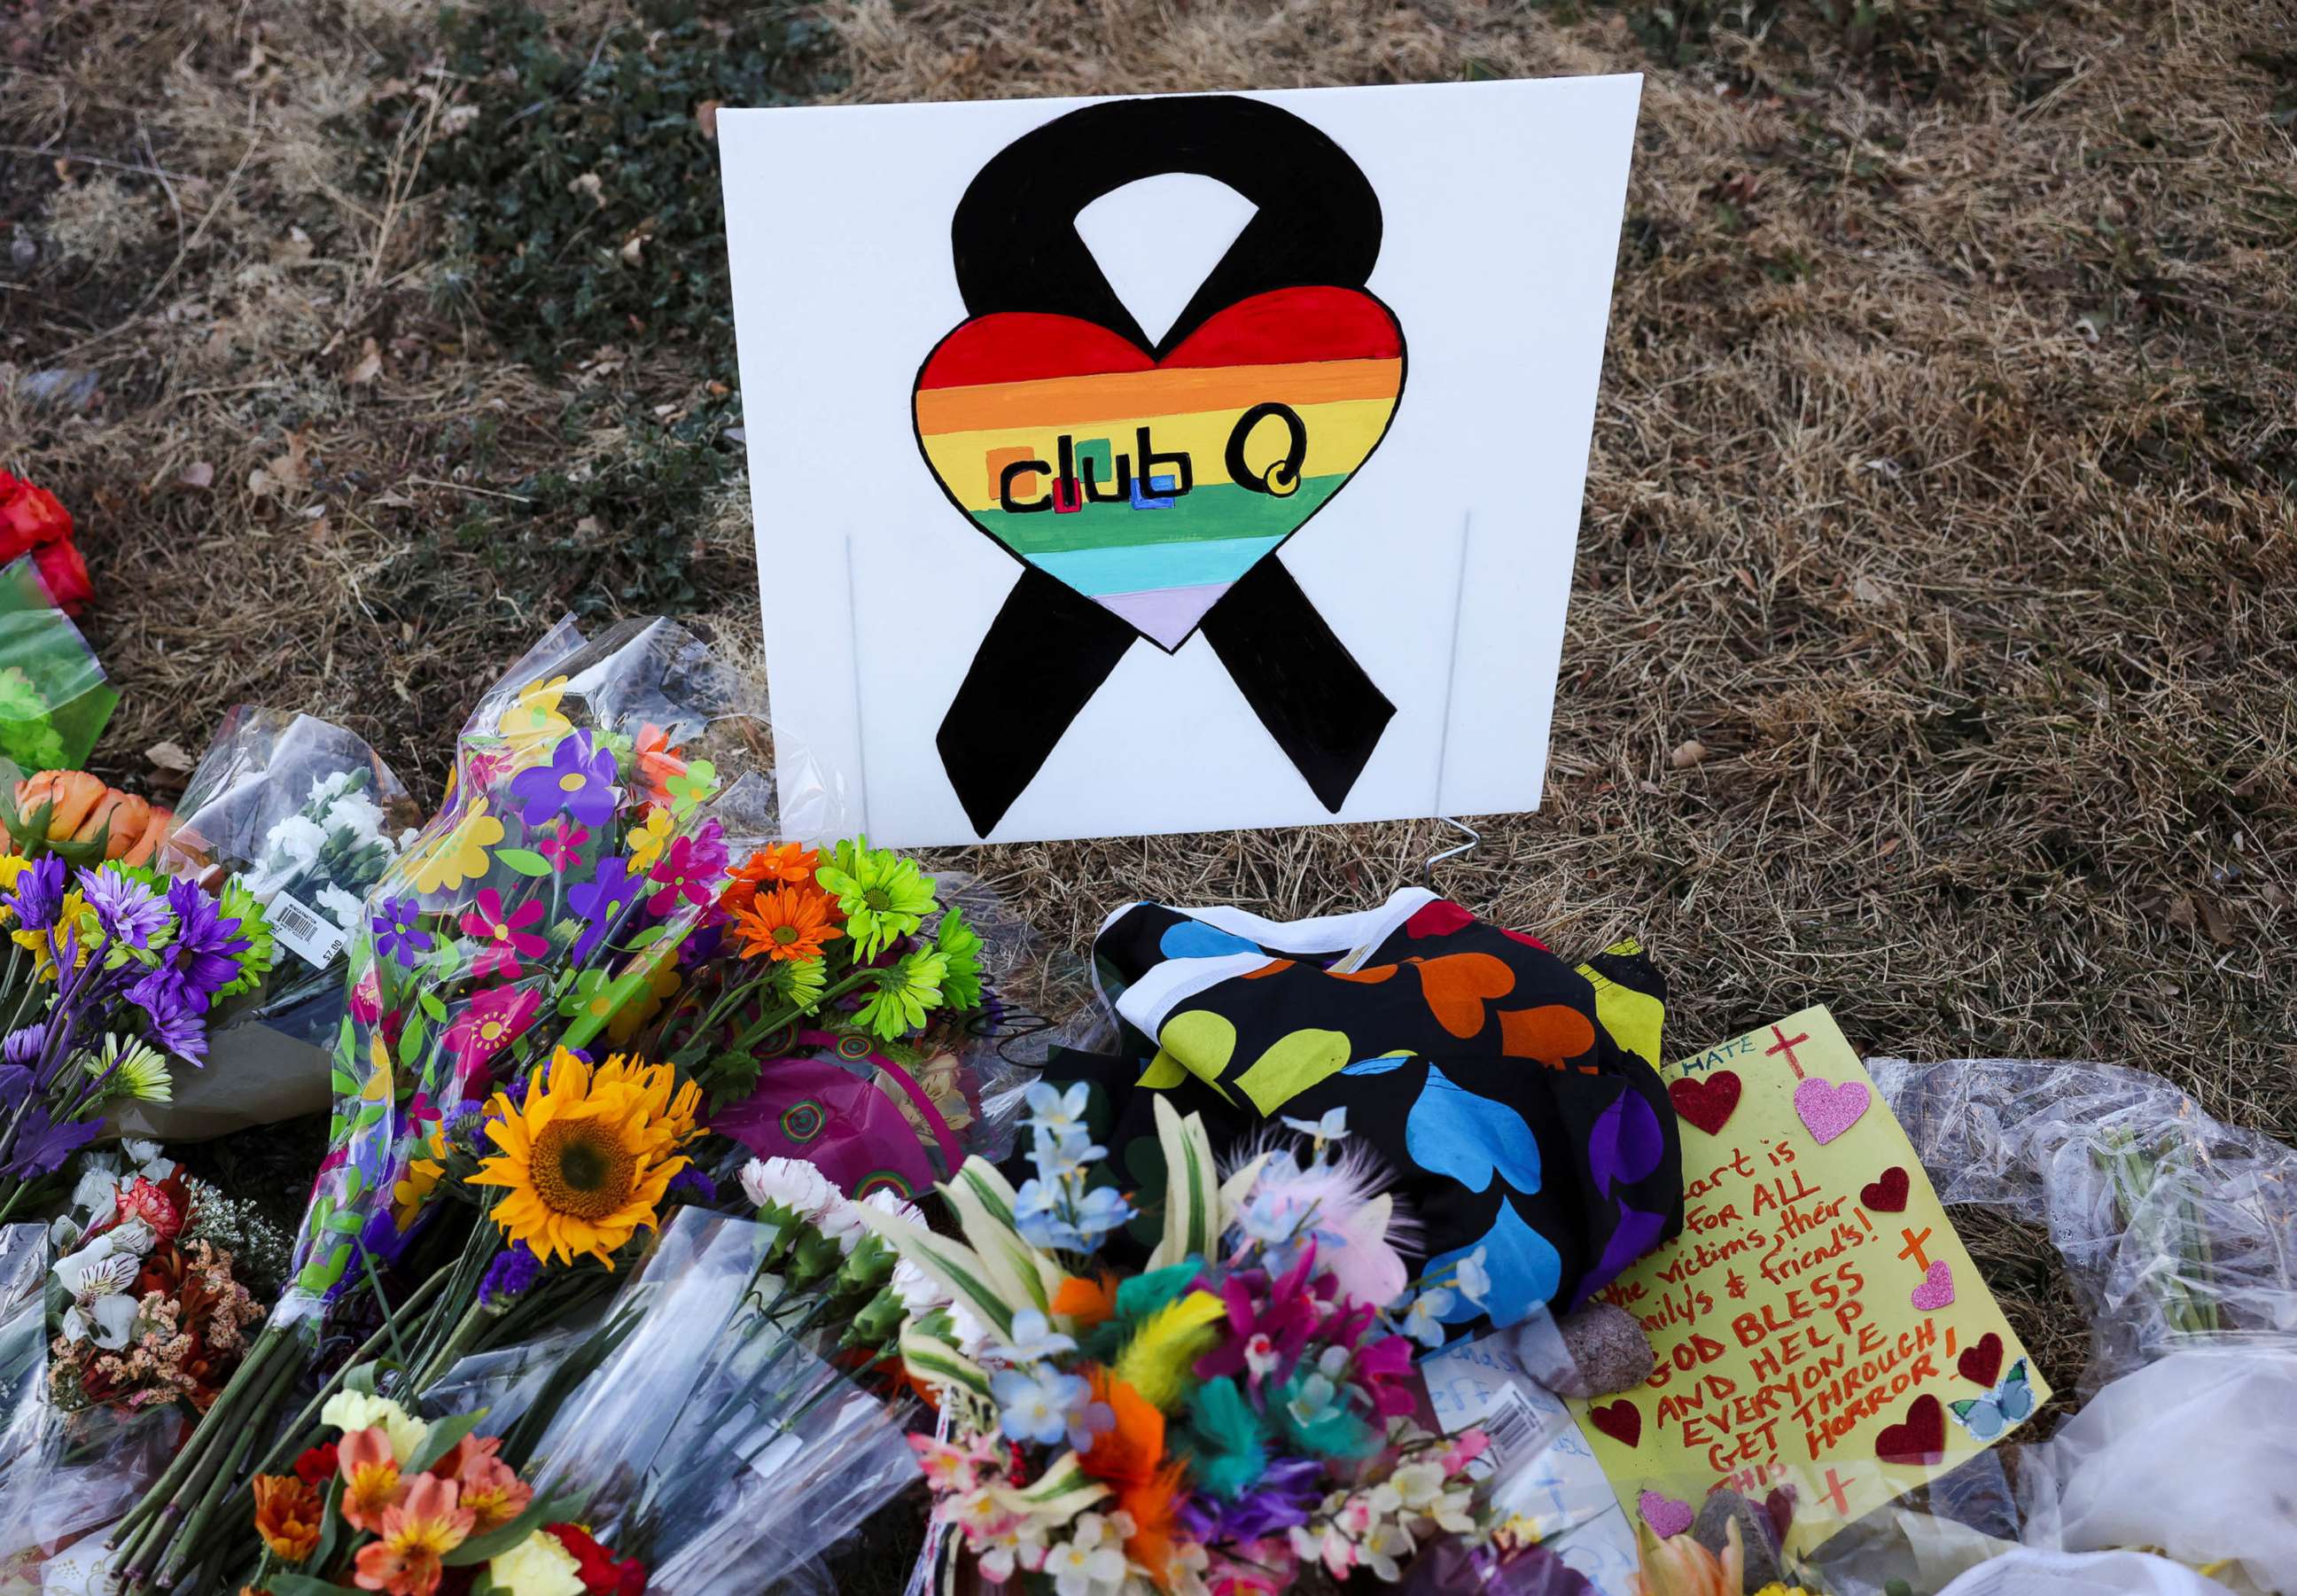 PHOTO: Floral tributes are placed in memory of the victims after a mass shooting at the Club Q gay nightclub in Colorado Springs, Colorado, Nov. 20, 2022.